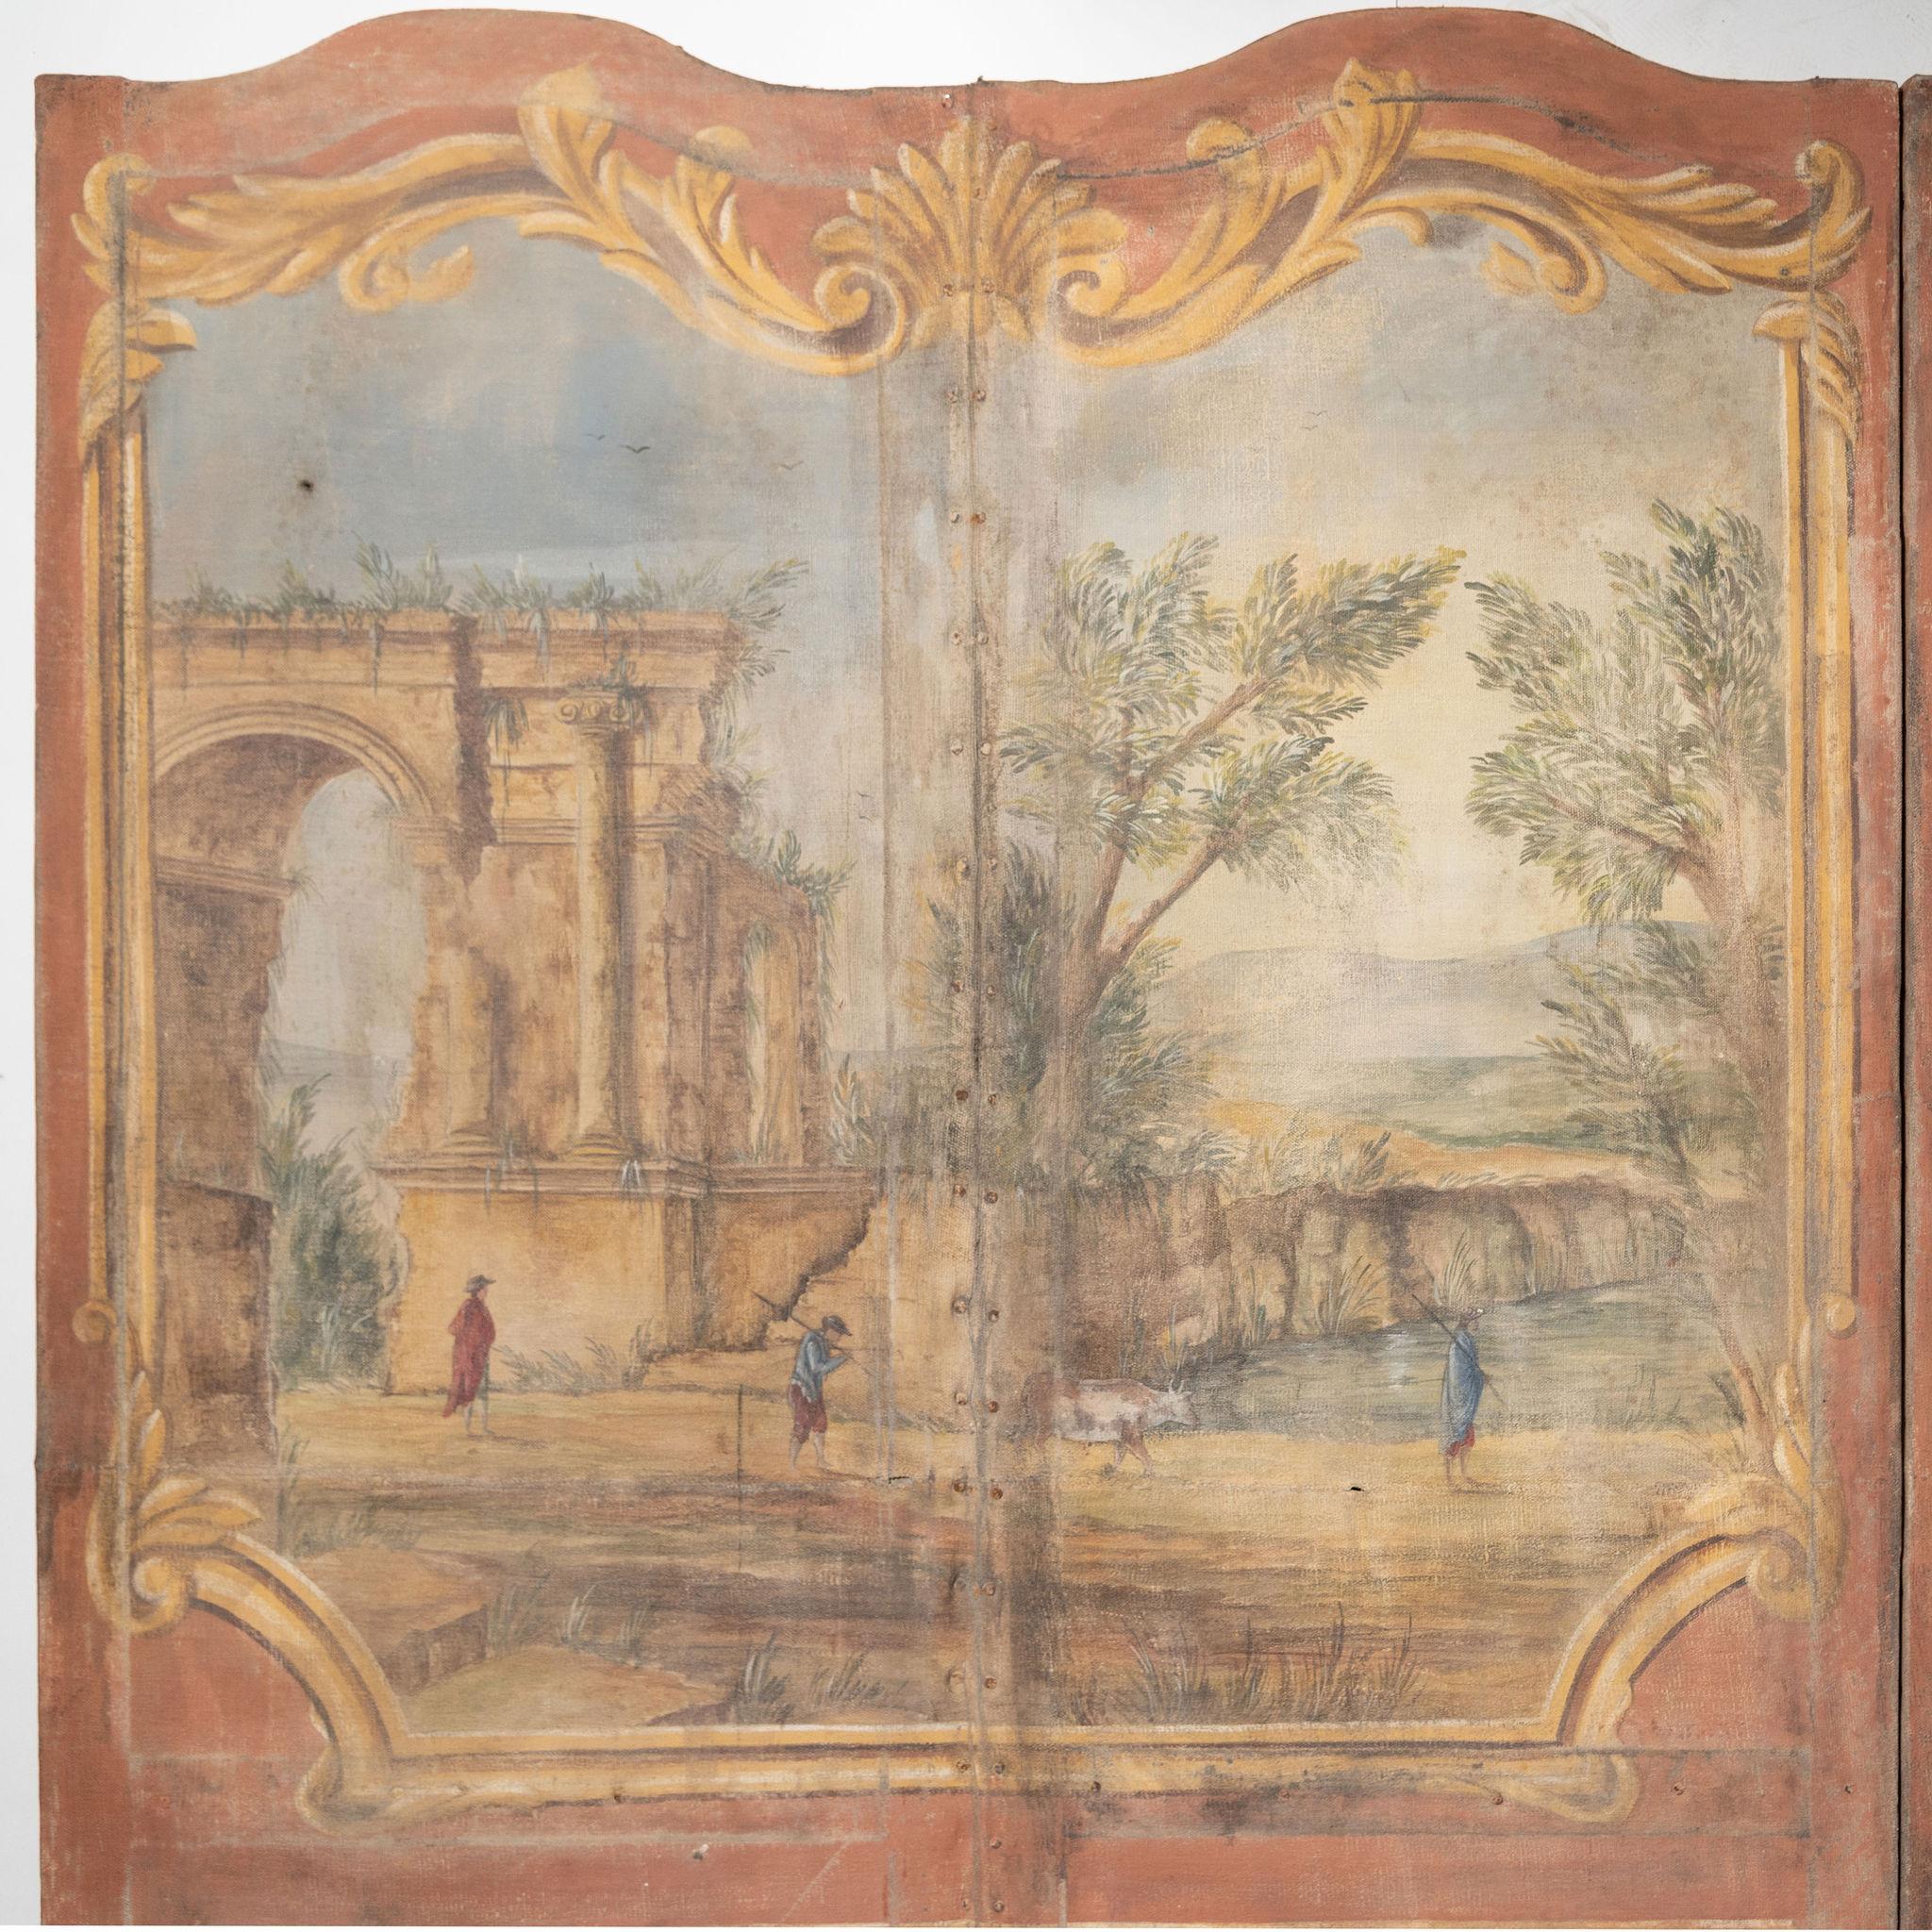 19th Century antique Italian screen, this would also look lovely as a wall panel. As a wall panel it is 118 inches long, as a screen it is approximately 86.5 inches long depending how much you fold it in. The scenes are just lovely, soft colour